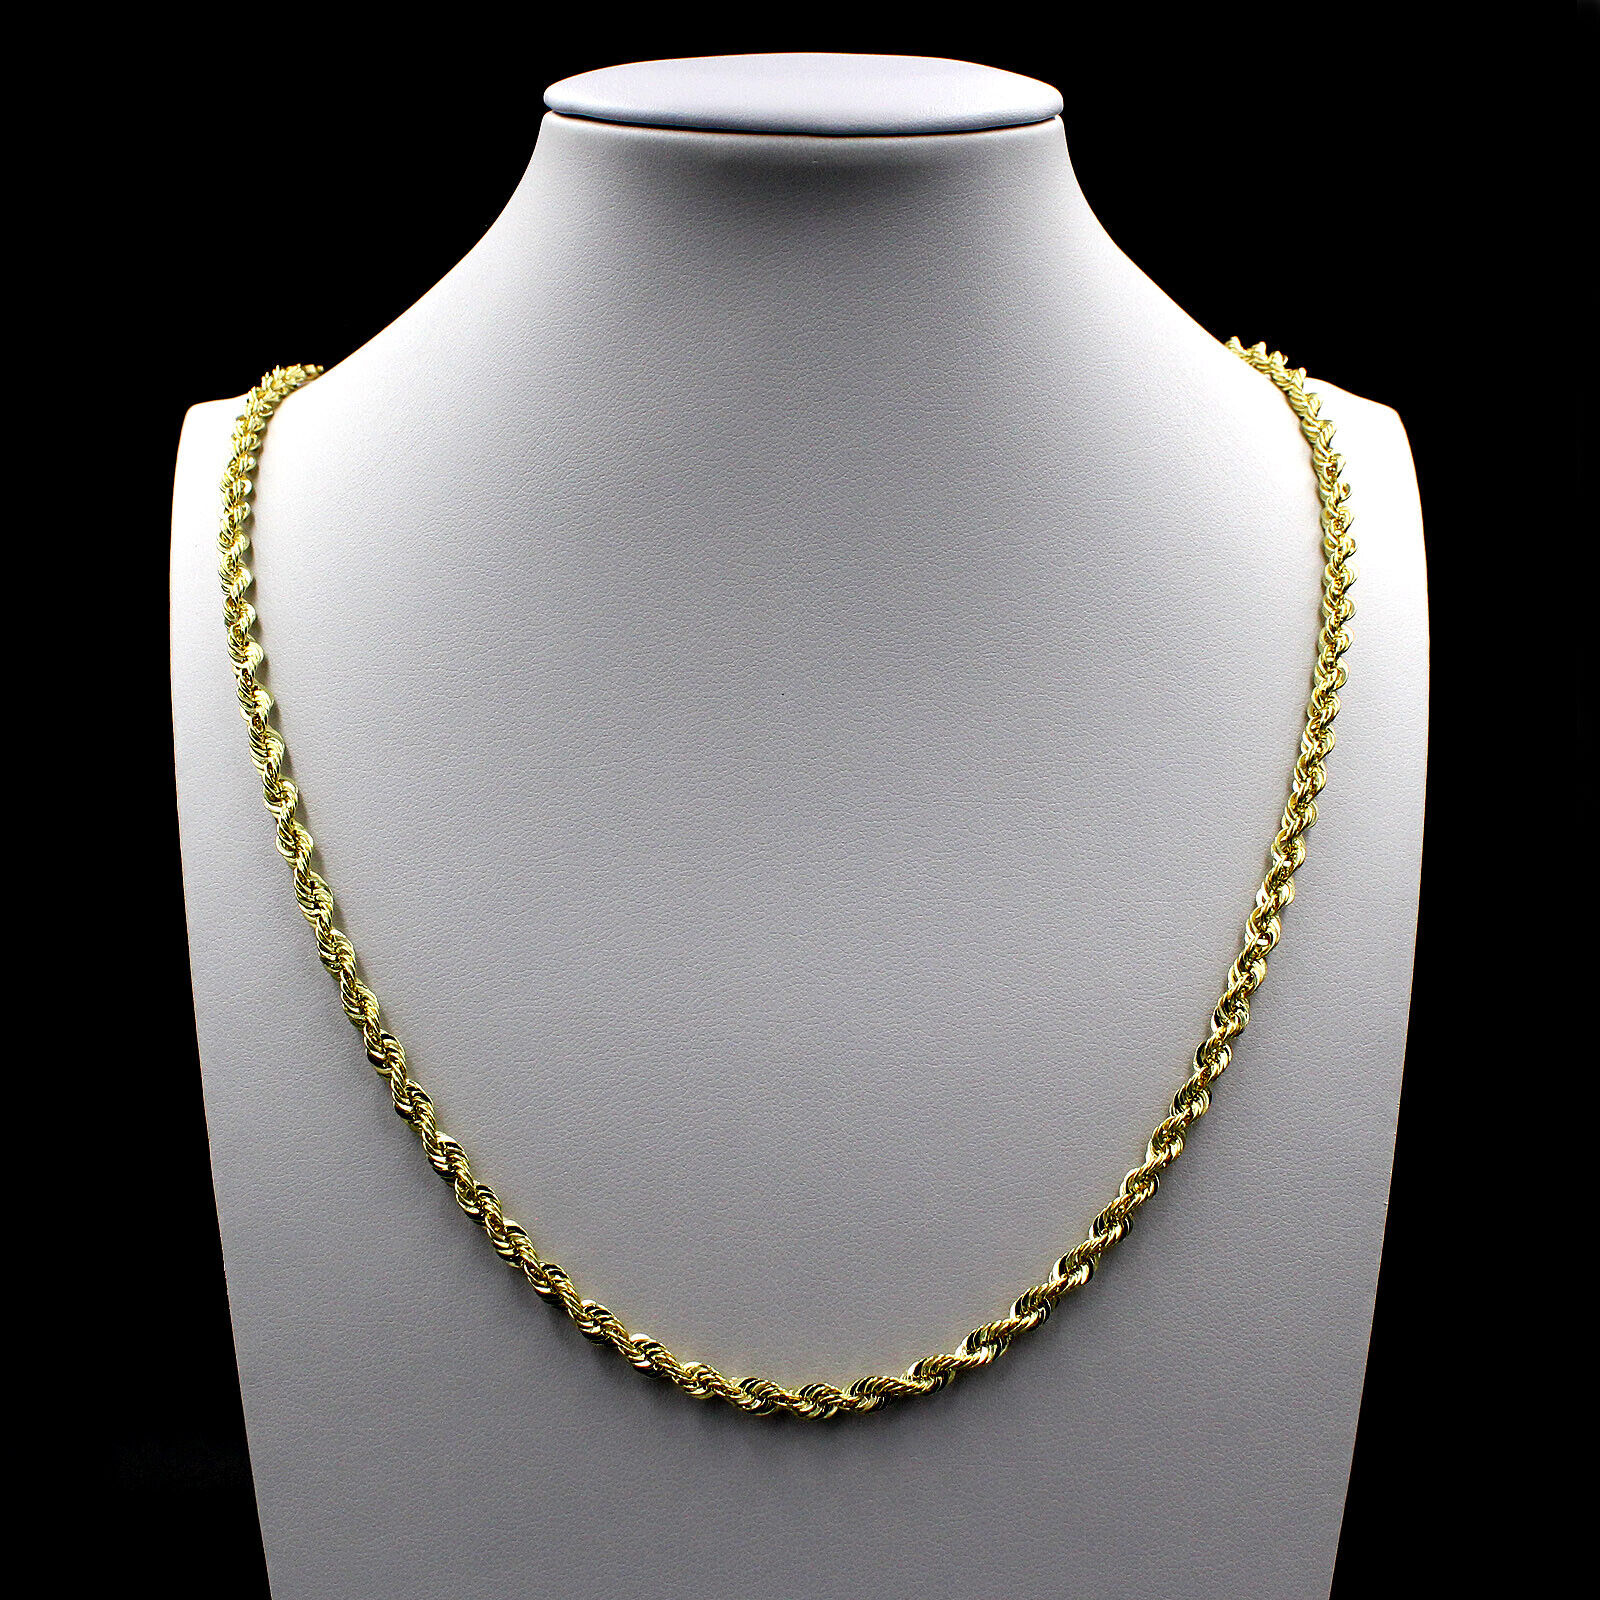 Real 10K Solid Yellow Gold 2.5mm Diamond Cut Rope Chain Pendant Necklace 16"-30"